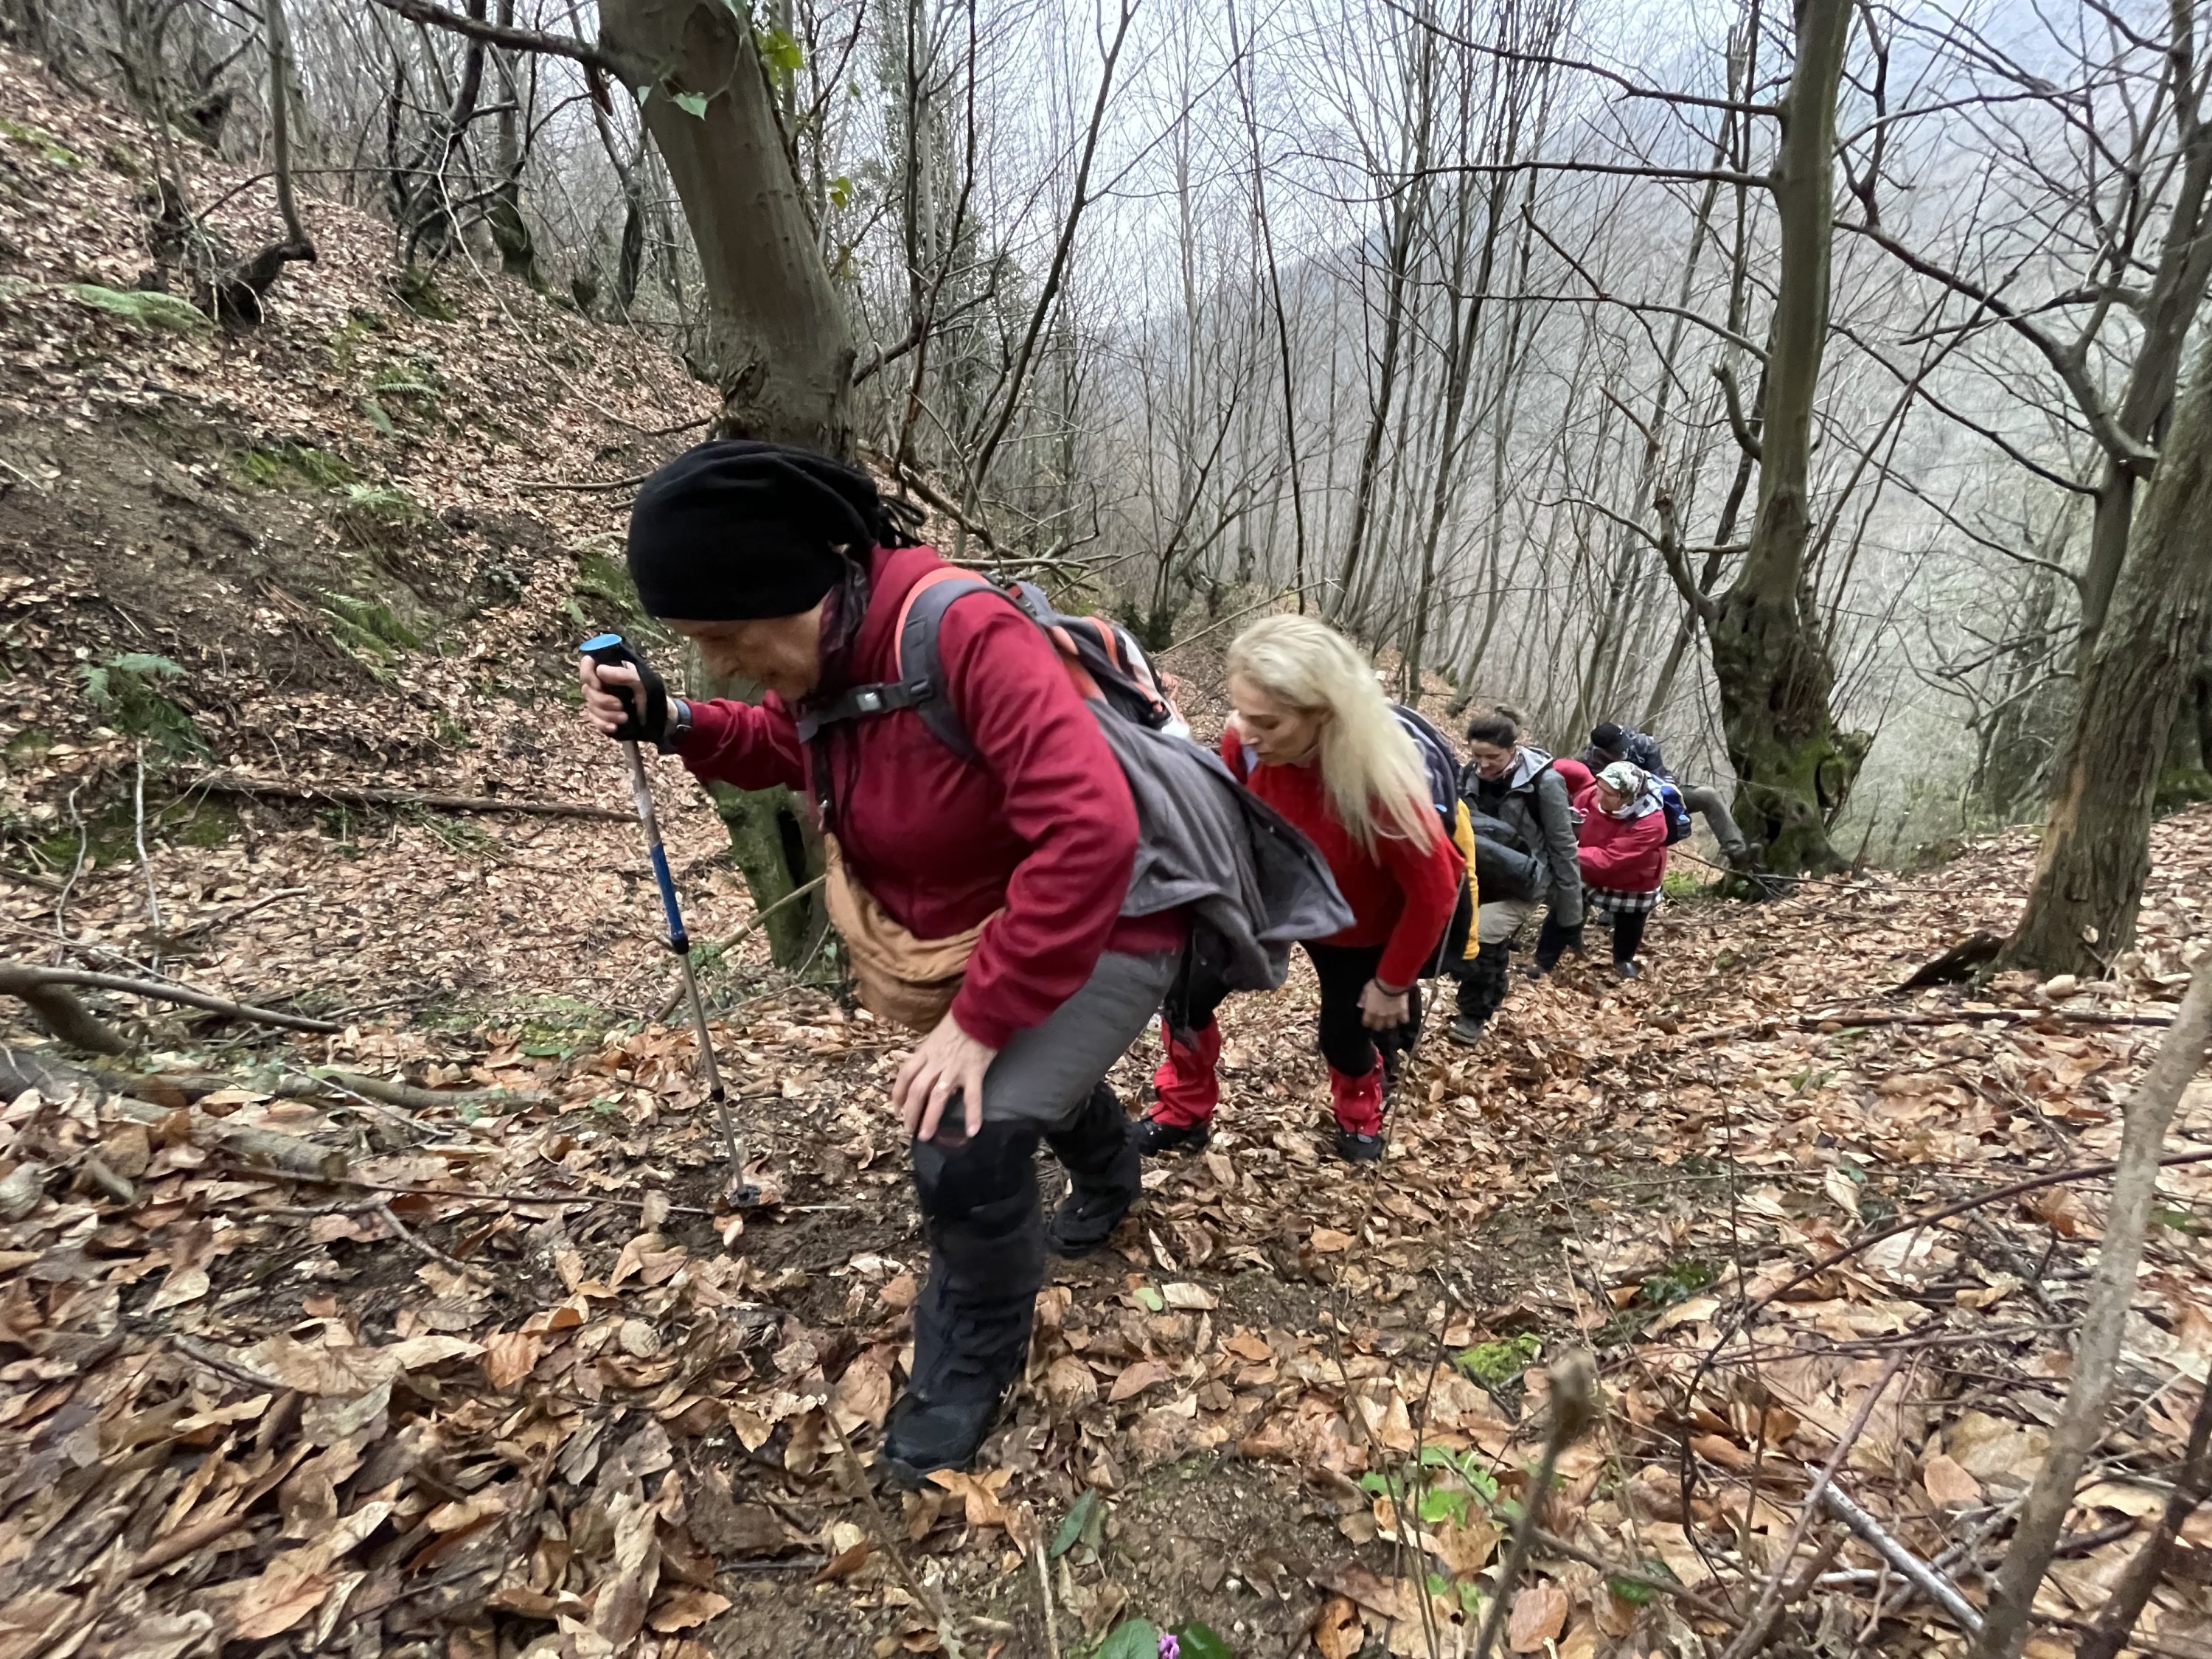 People trekking along the 16-kilometer Kurtköy-Güneyköy part of the 801-kilometer 'Sufi Trail' that stretches from Istanbul to Konya in central Turkey and takes 40 days to complete, Feb. 13, 2022. (AA Photo)